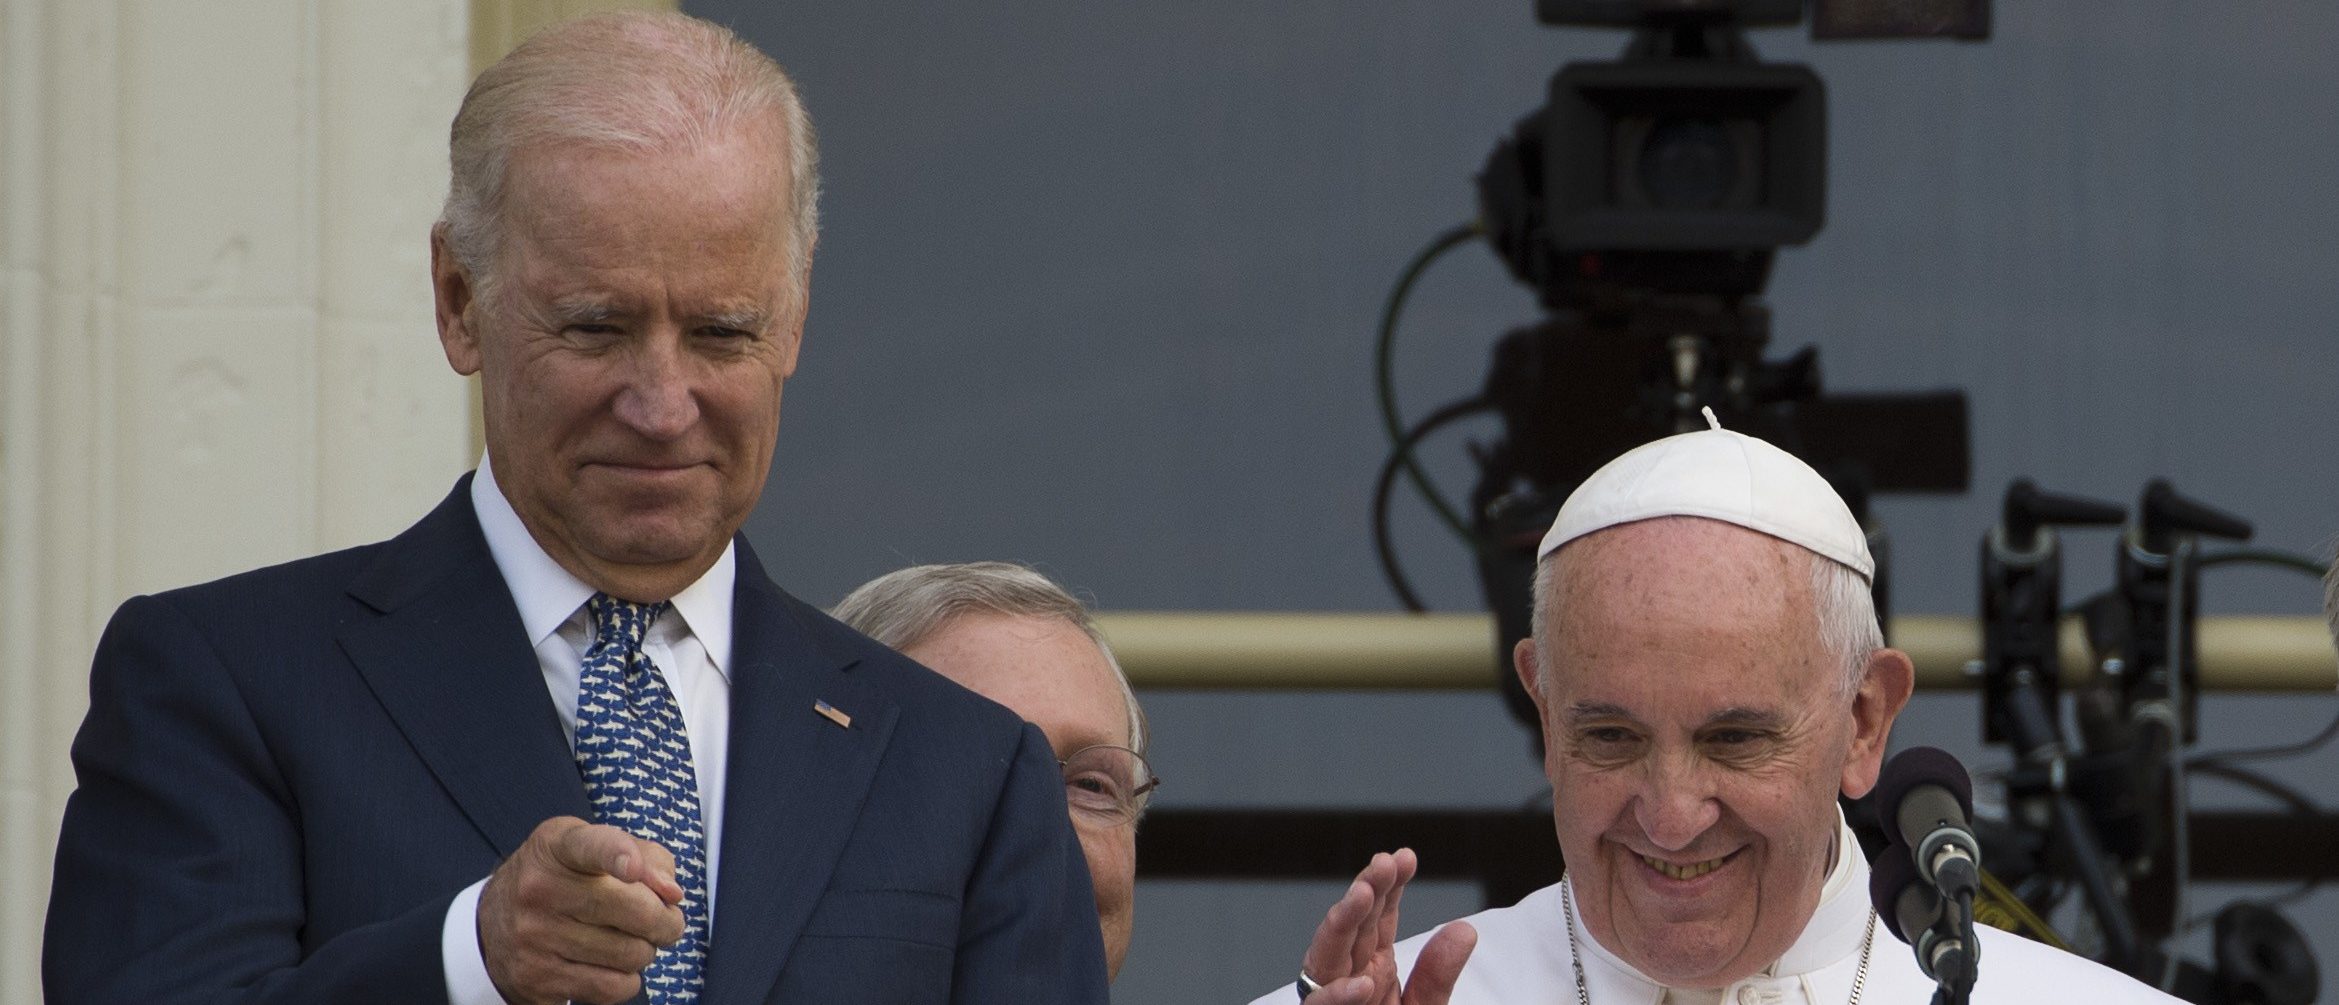 Pope Francis waves, next to US Vice President Joe Biden, on a balcony after speaking at the US Capitol building in Washington, DC on September 24, 2015. AFP PHOTO/ ANDREW CABALLERO-REYNOLDS (Photo credit should read Andrew Caballero-Reynolds/AFP via Getty Images)